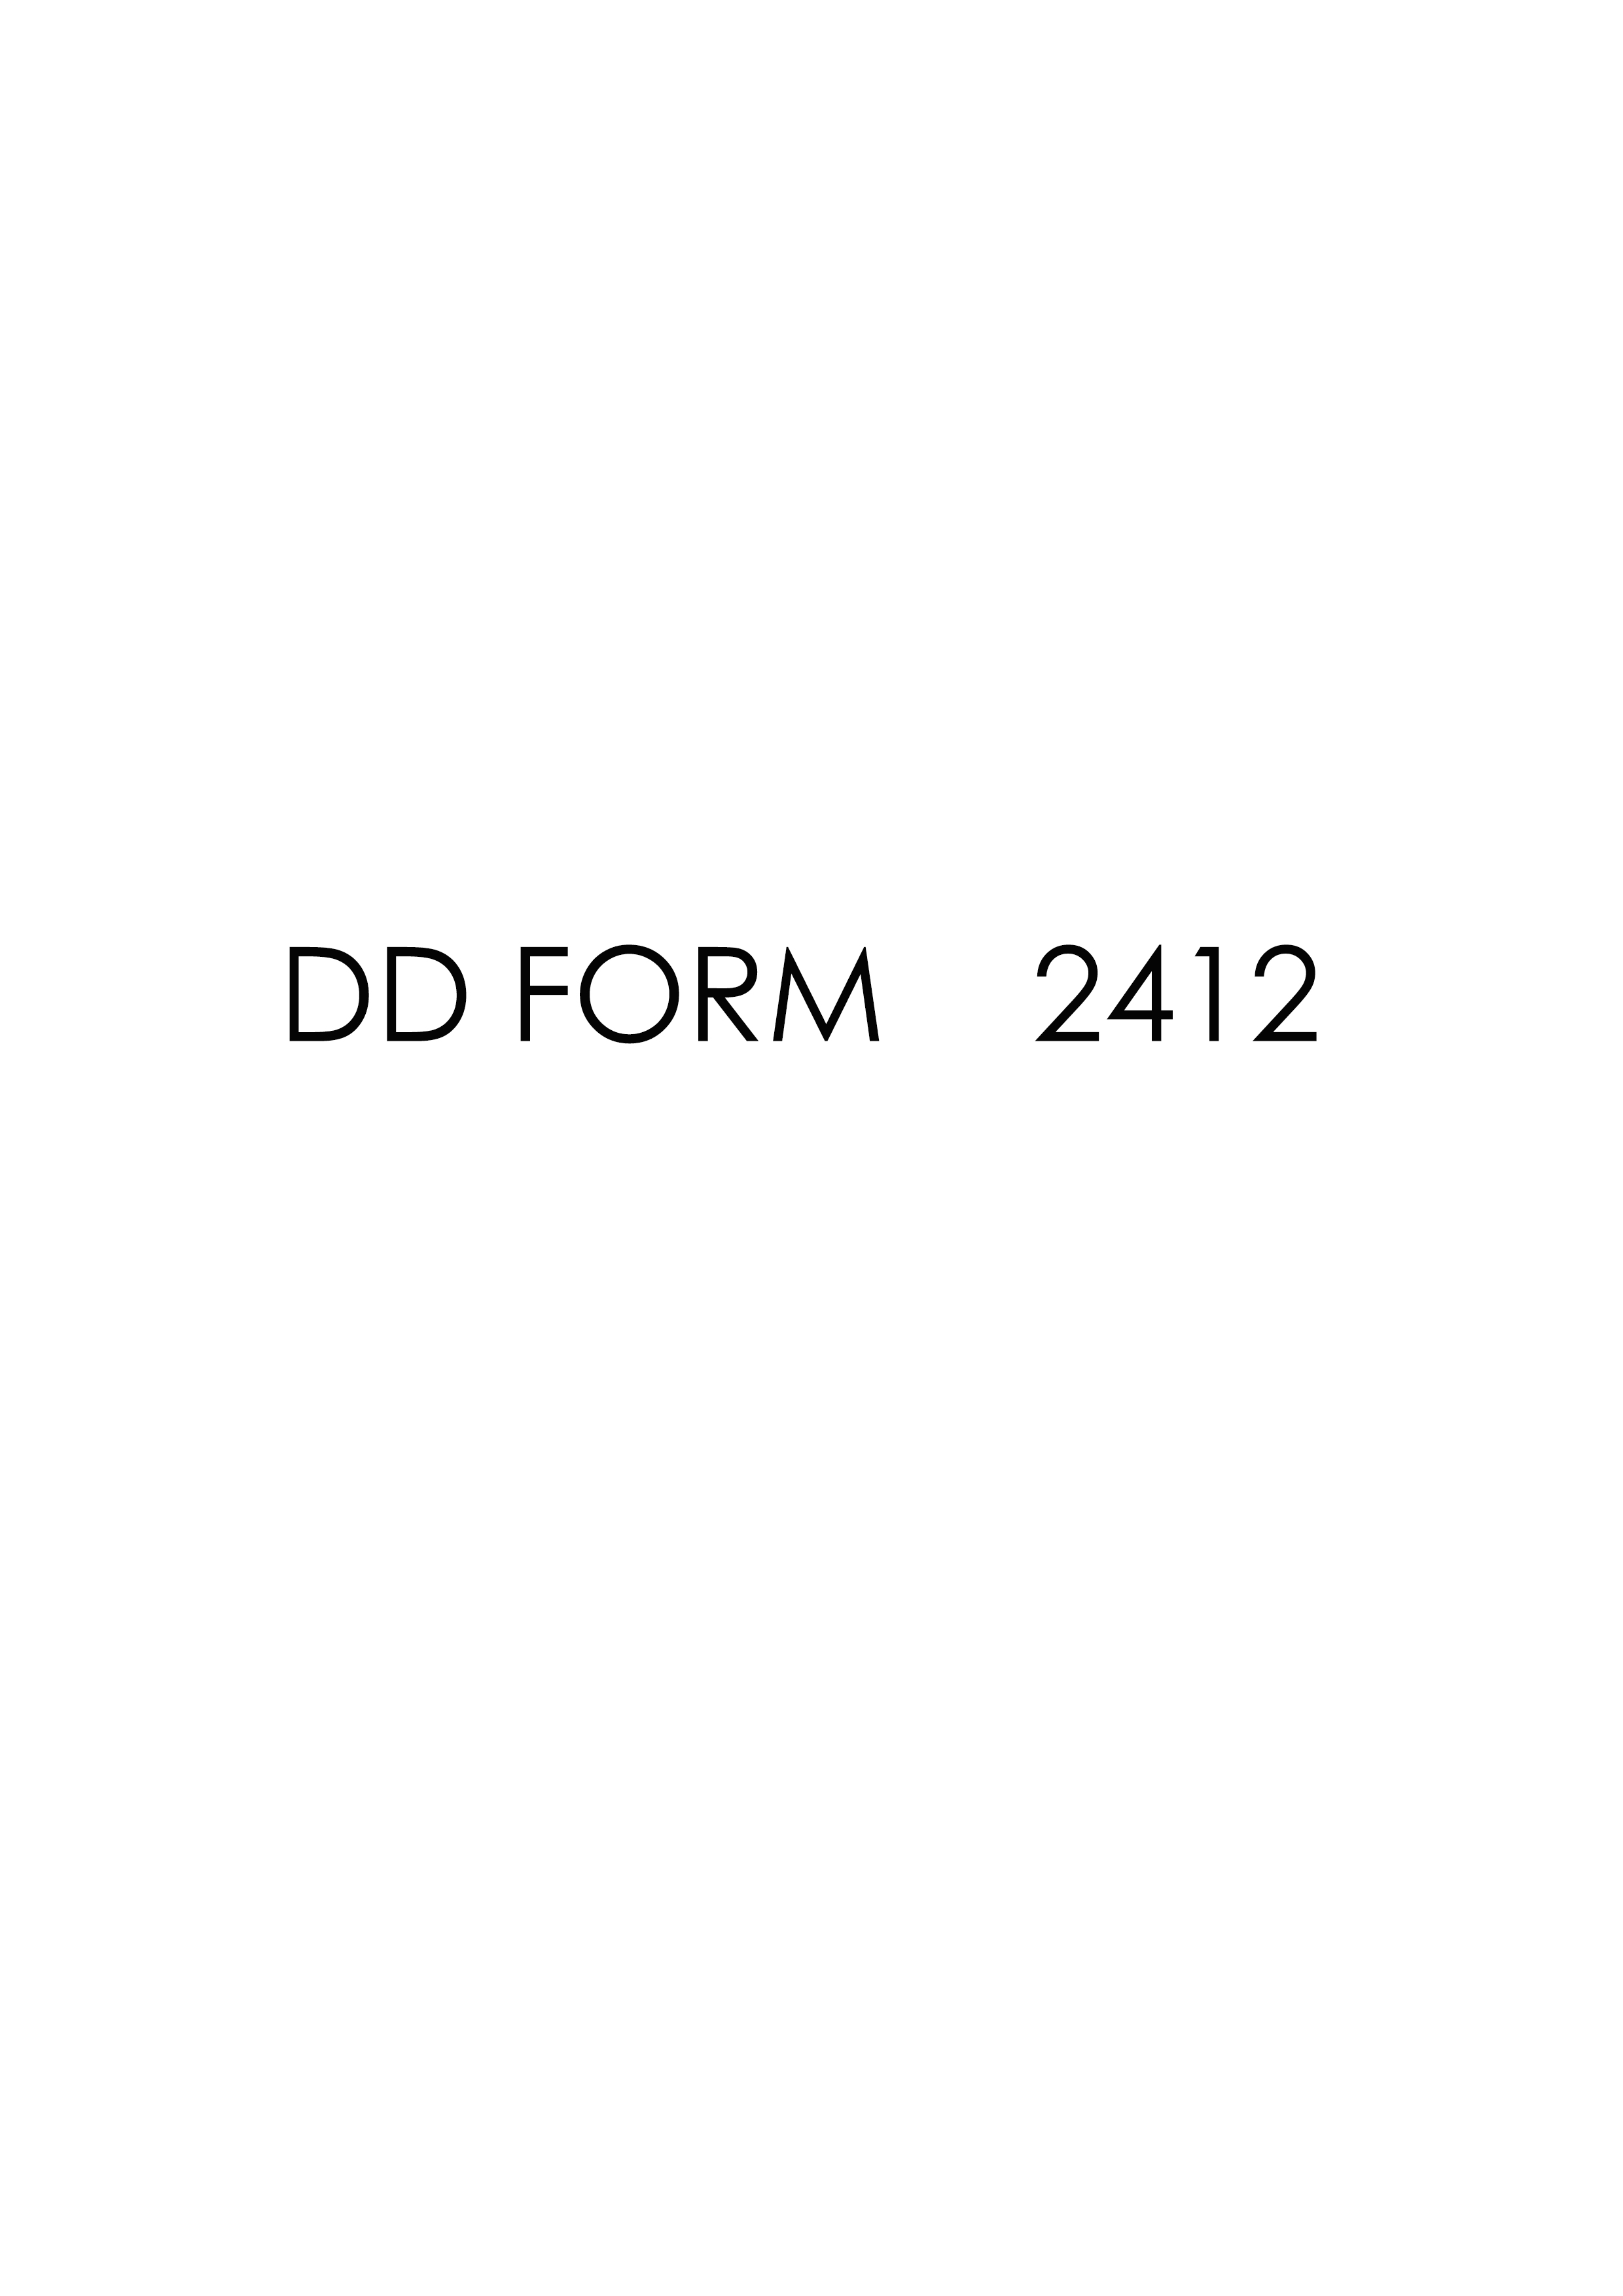 Download Fillable dd Form 2412